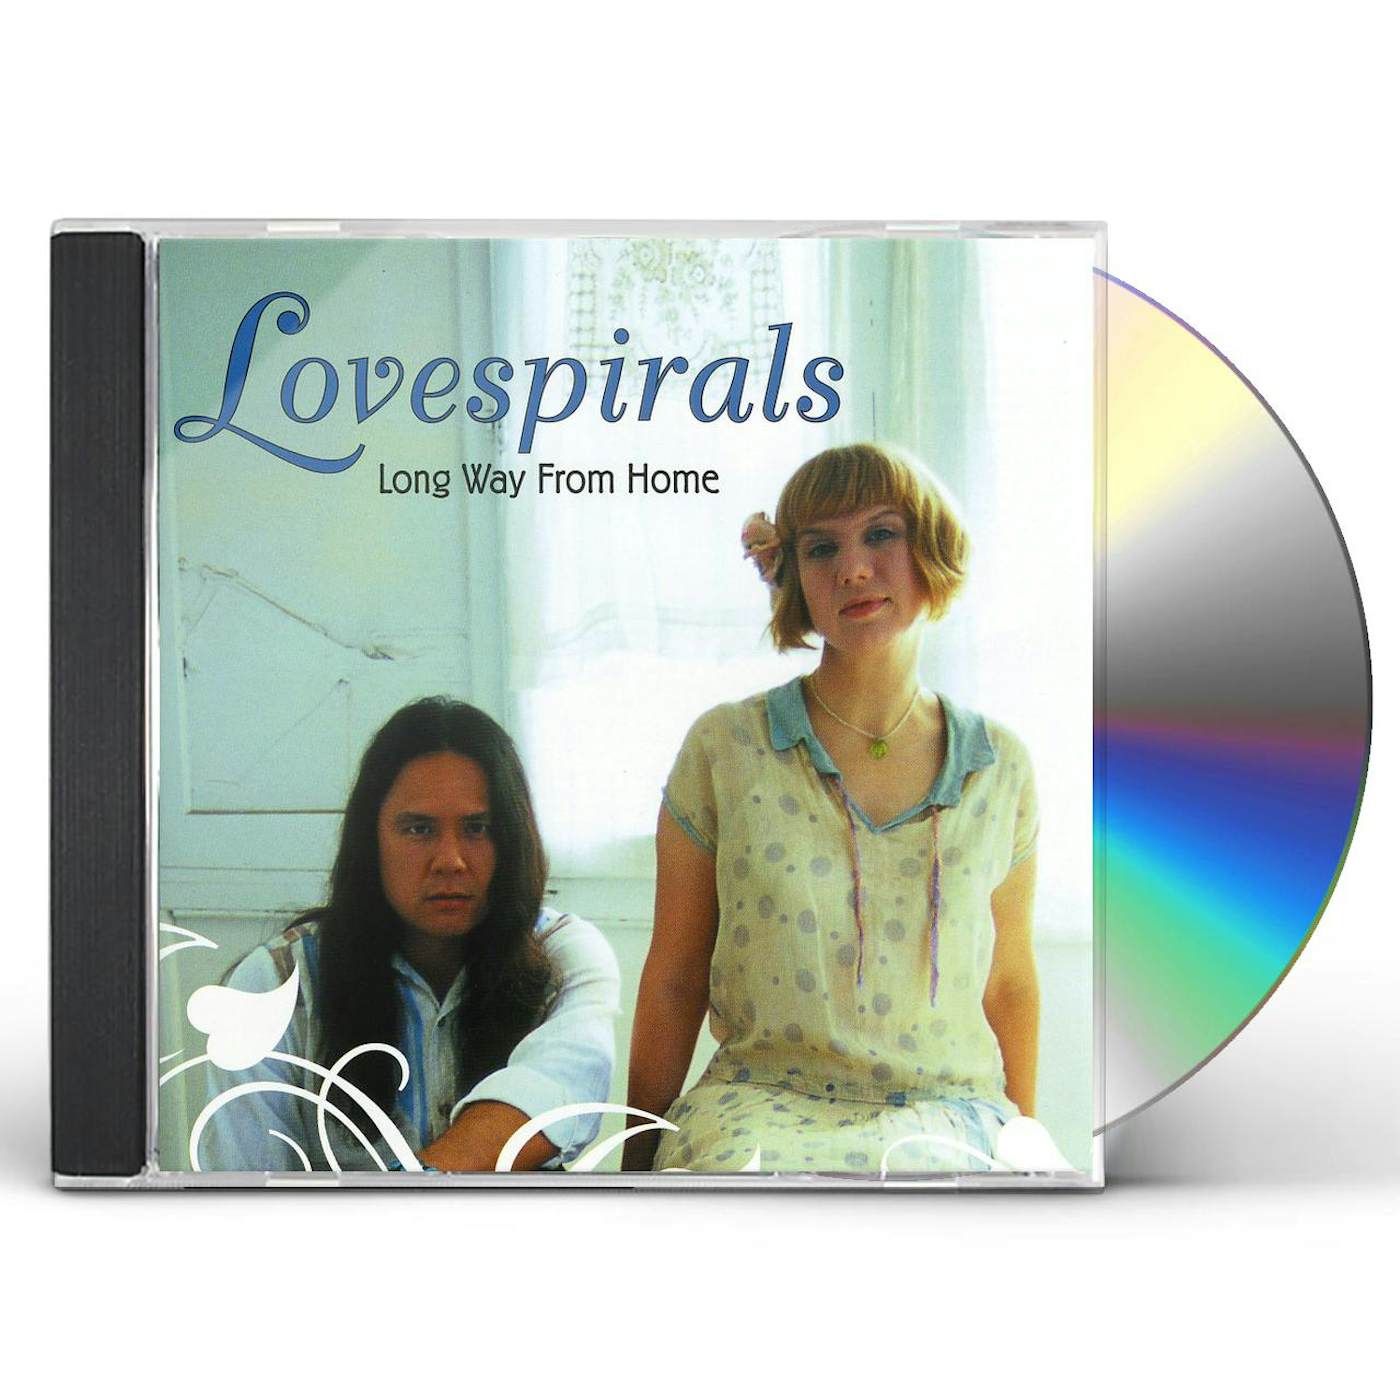 Lovespirals LONG WAY FROM HOME CD